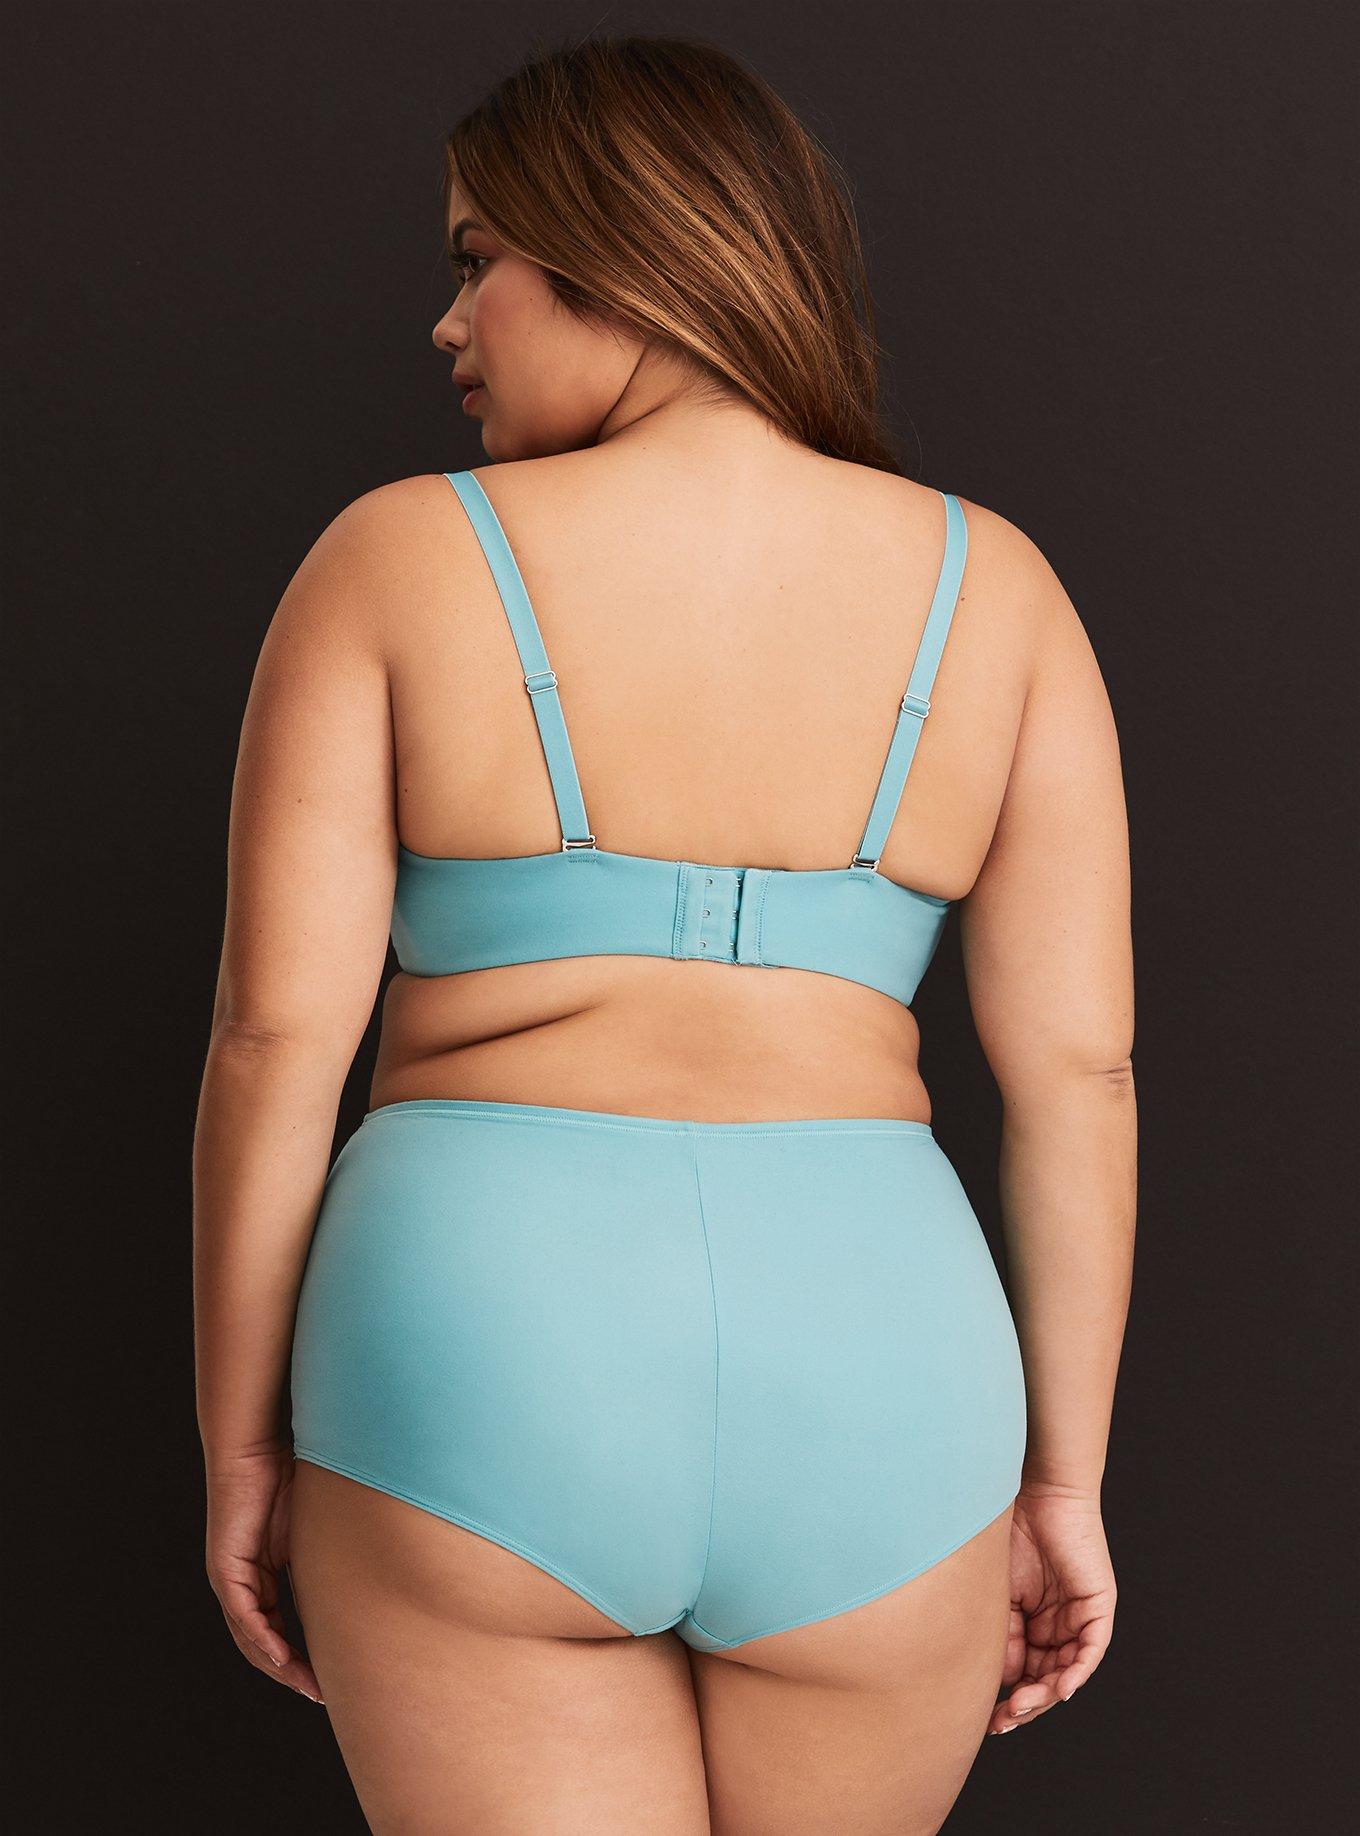 Torrid - Sexy has a new shape. Go ahead and ask our HQ girls! Our Torrid  Curve Collection is our new favorite everyday bra + panty. ✨ Shop Curve  Collection: torrid.me/egewKT